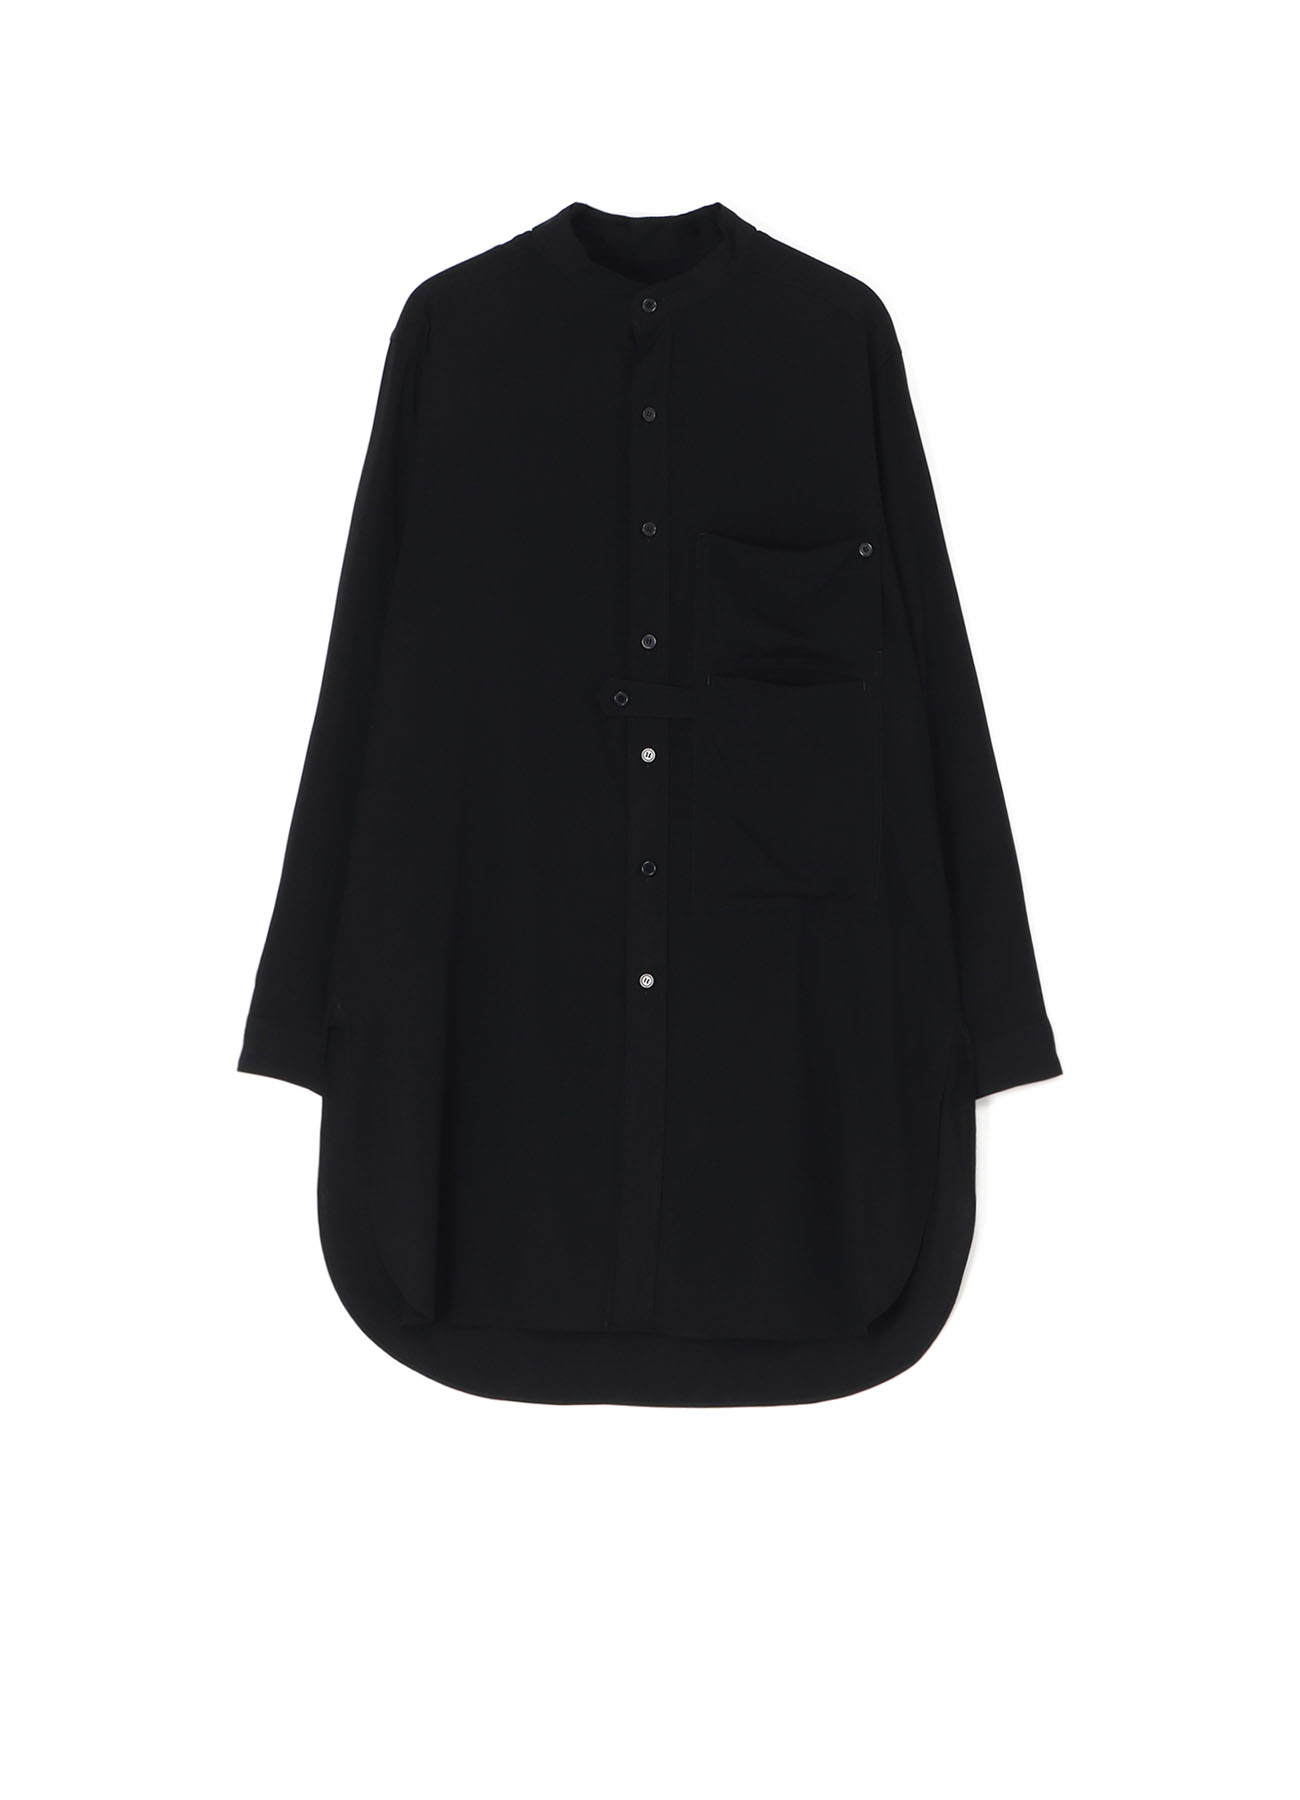 RAYON CAMBRIC SHIRT WITH FLAP POCKET DETAIL